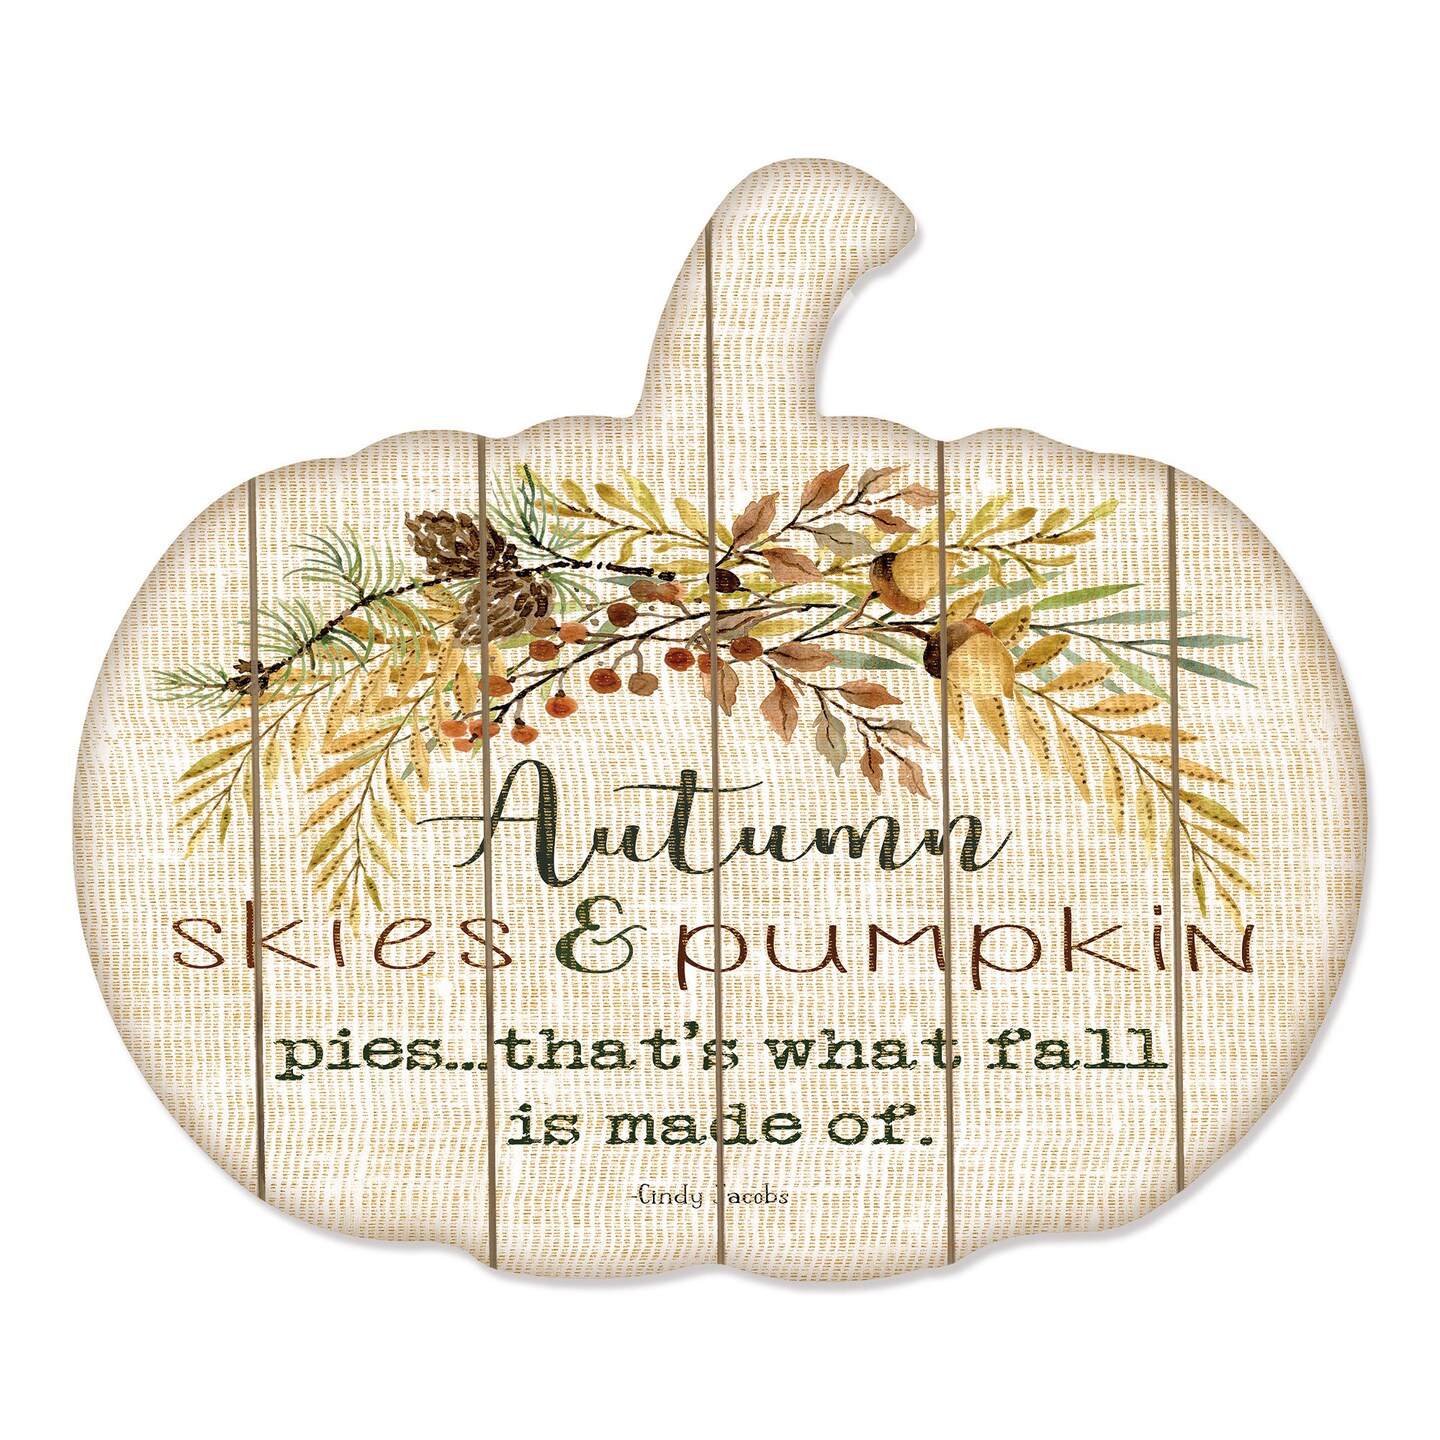 Autumn Skies - By Artisan Cindy Jacobs Printed on Wooden Pumpkin Wall Art